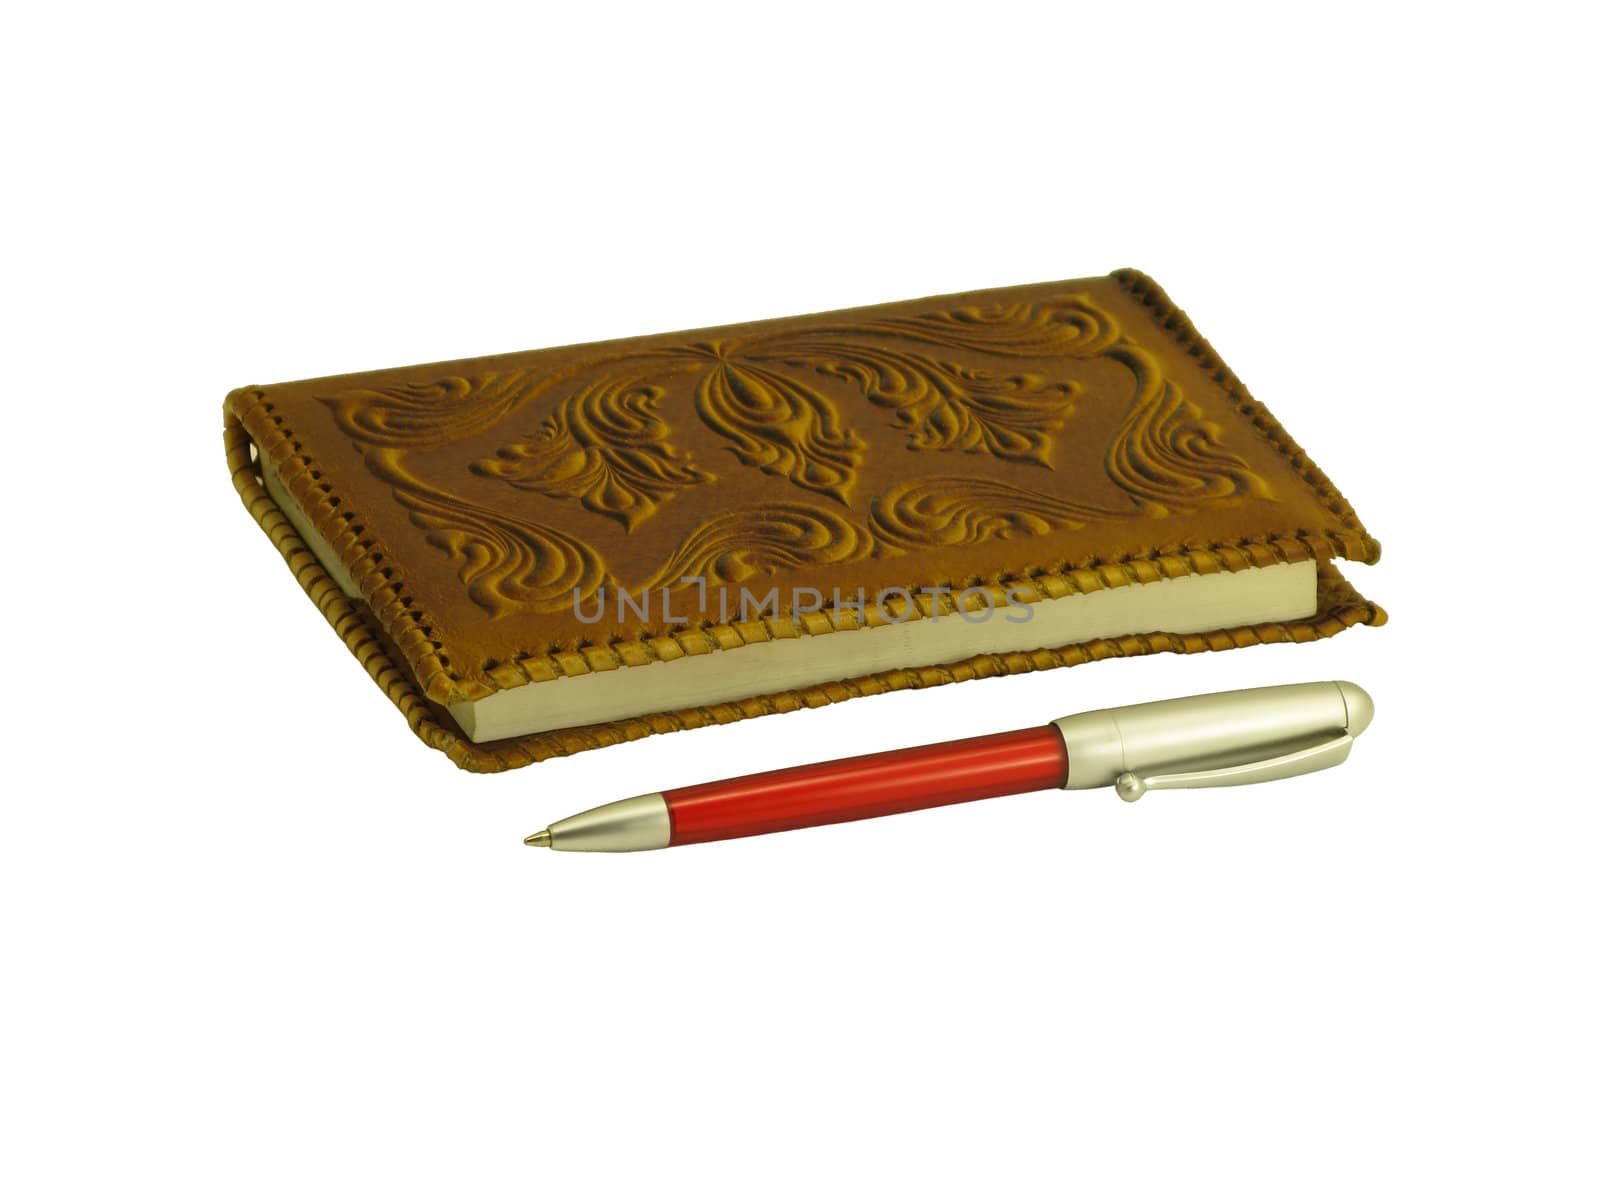 Notebook and a pen by wander